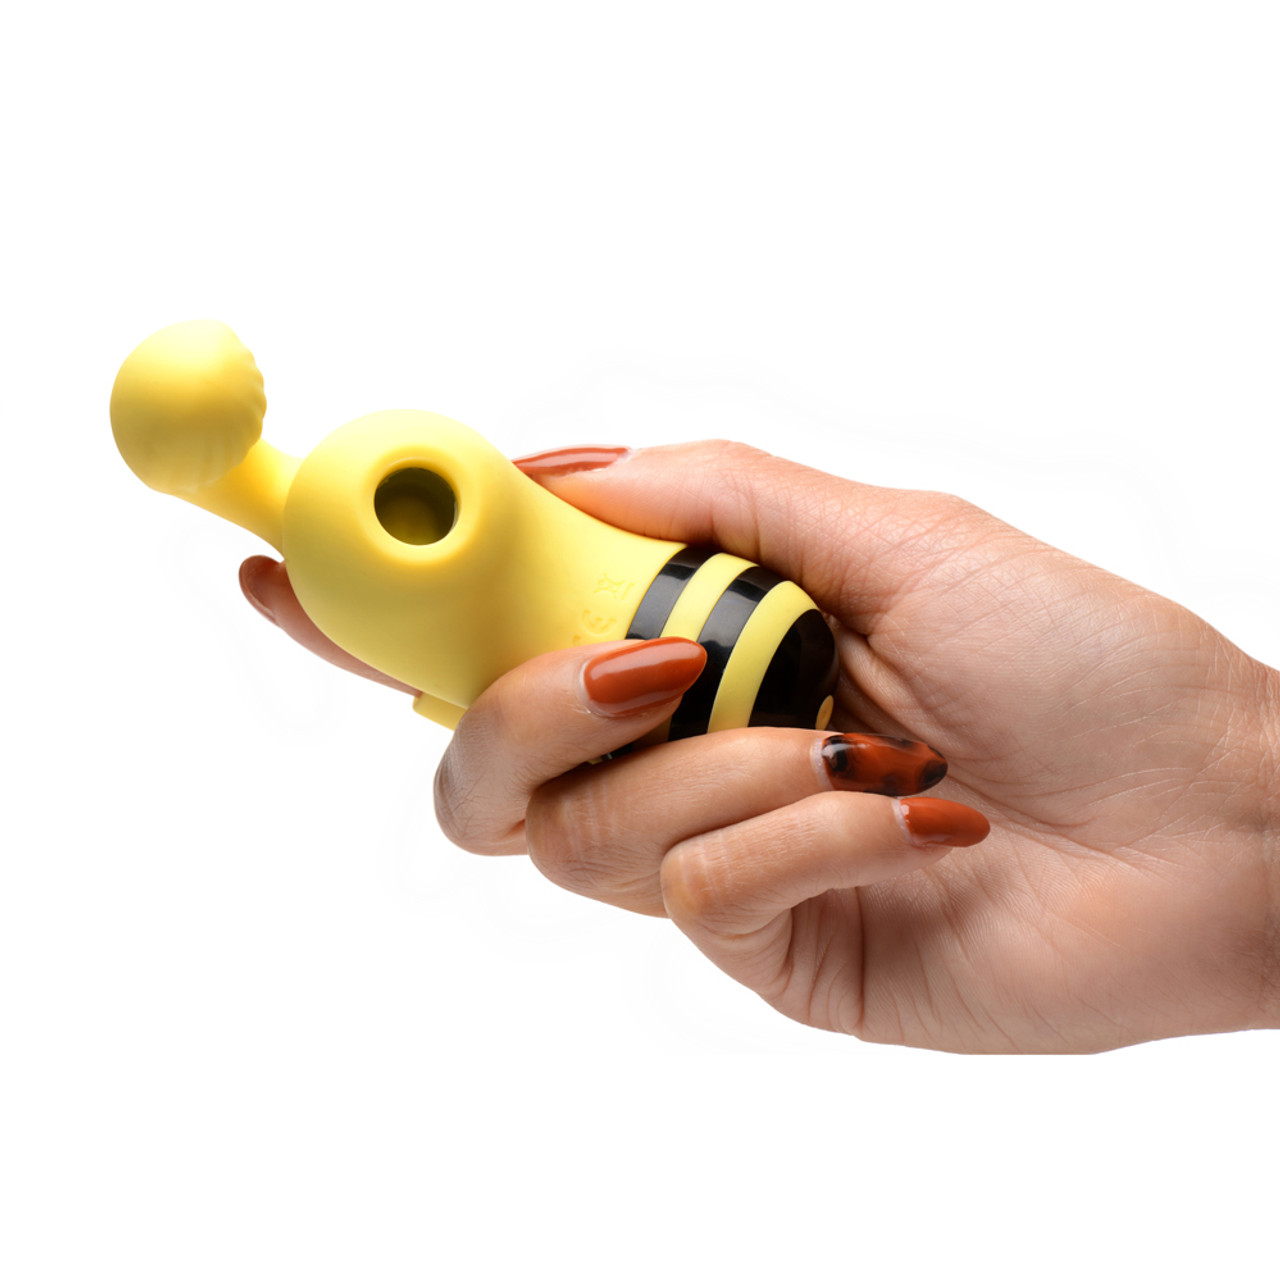 Buy the Shegasm Mini Finger-mounted 7-function Rechargeable